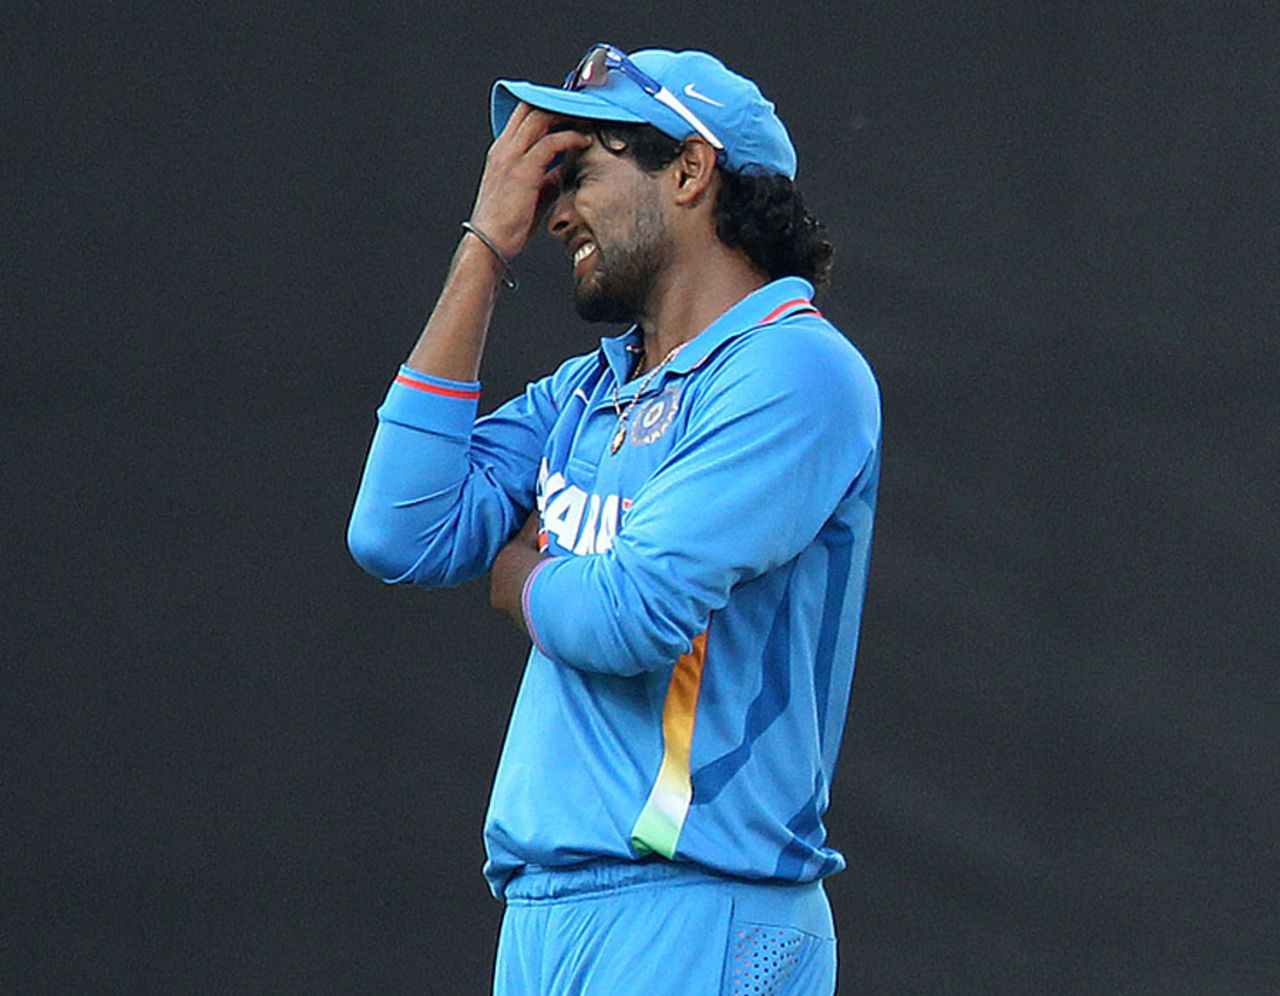 Ravindra Jadeja reacts after spurning an opportunity for a run-out, India v England, 2nd ODI, Kochi, January 15, 2013